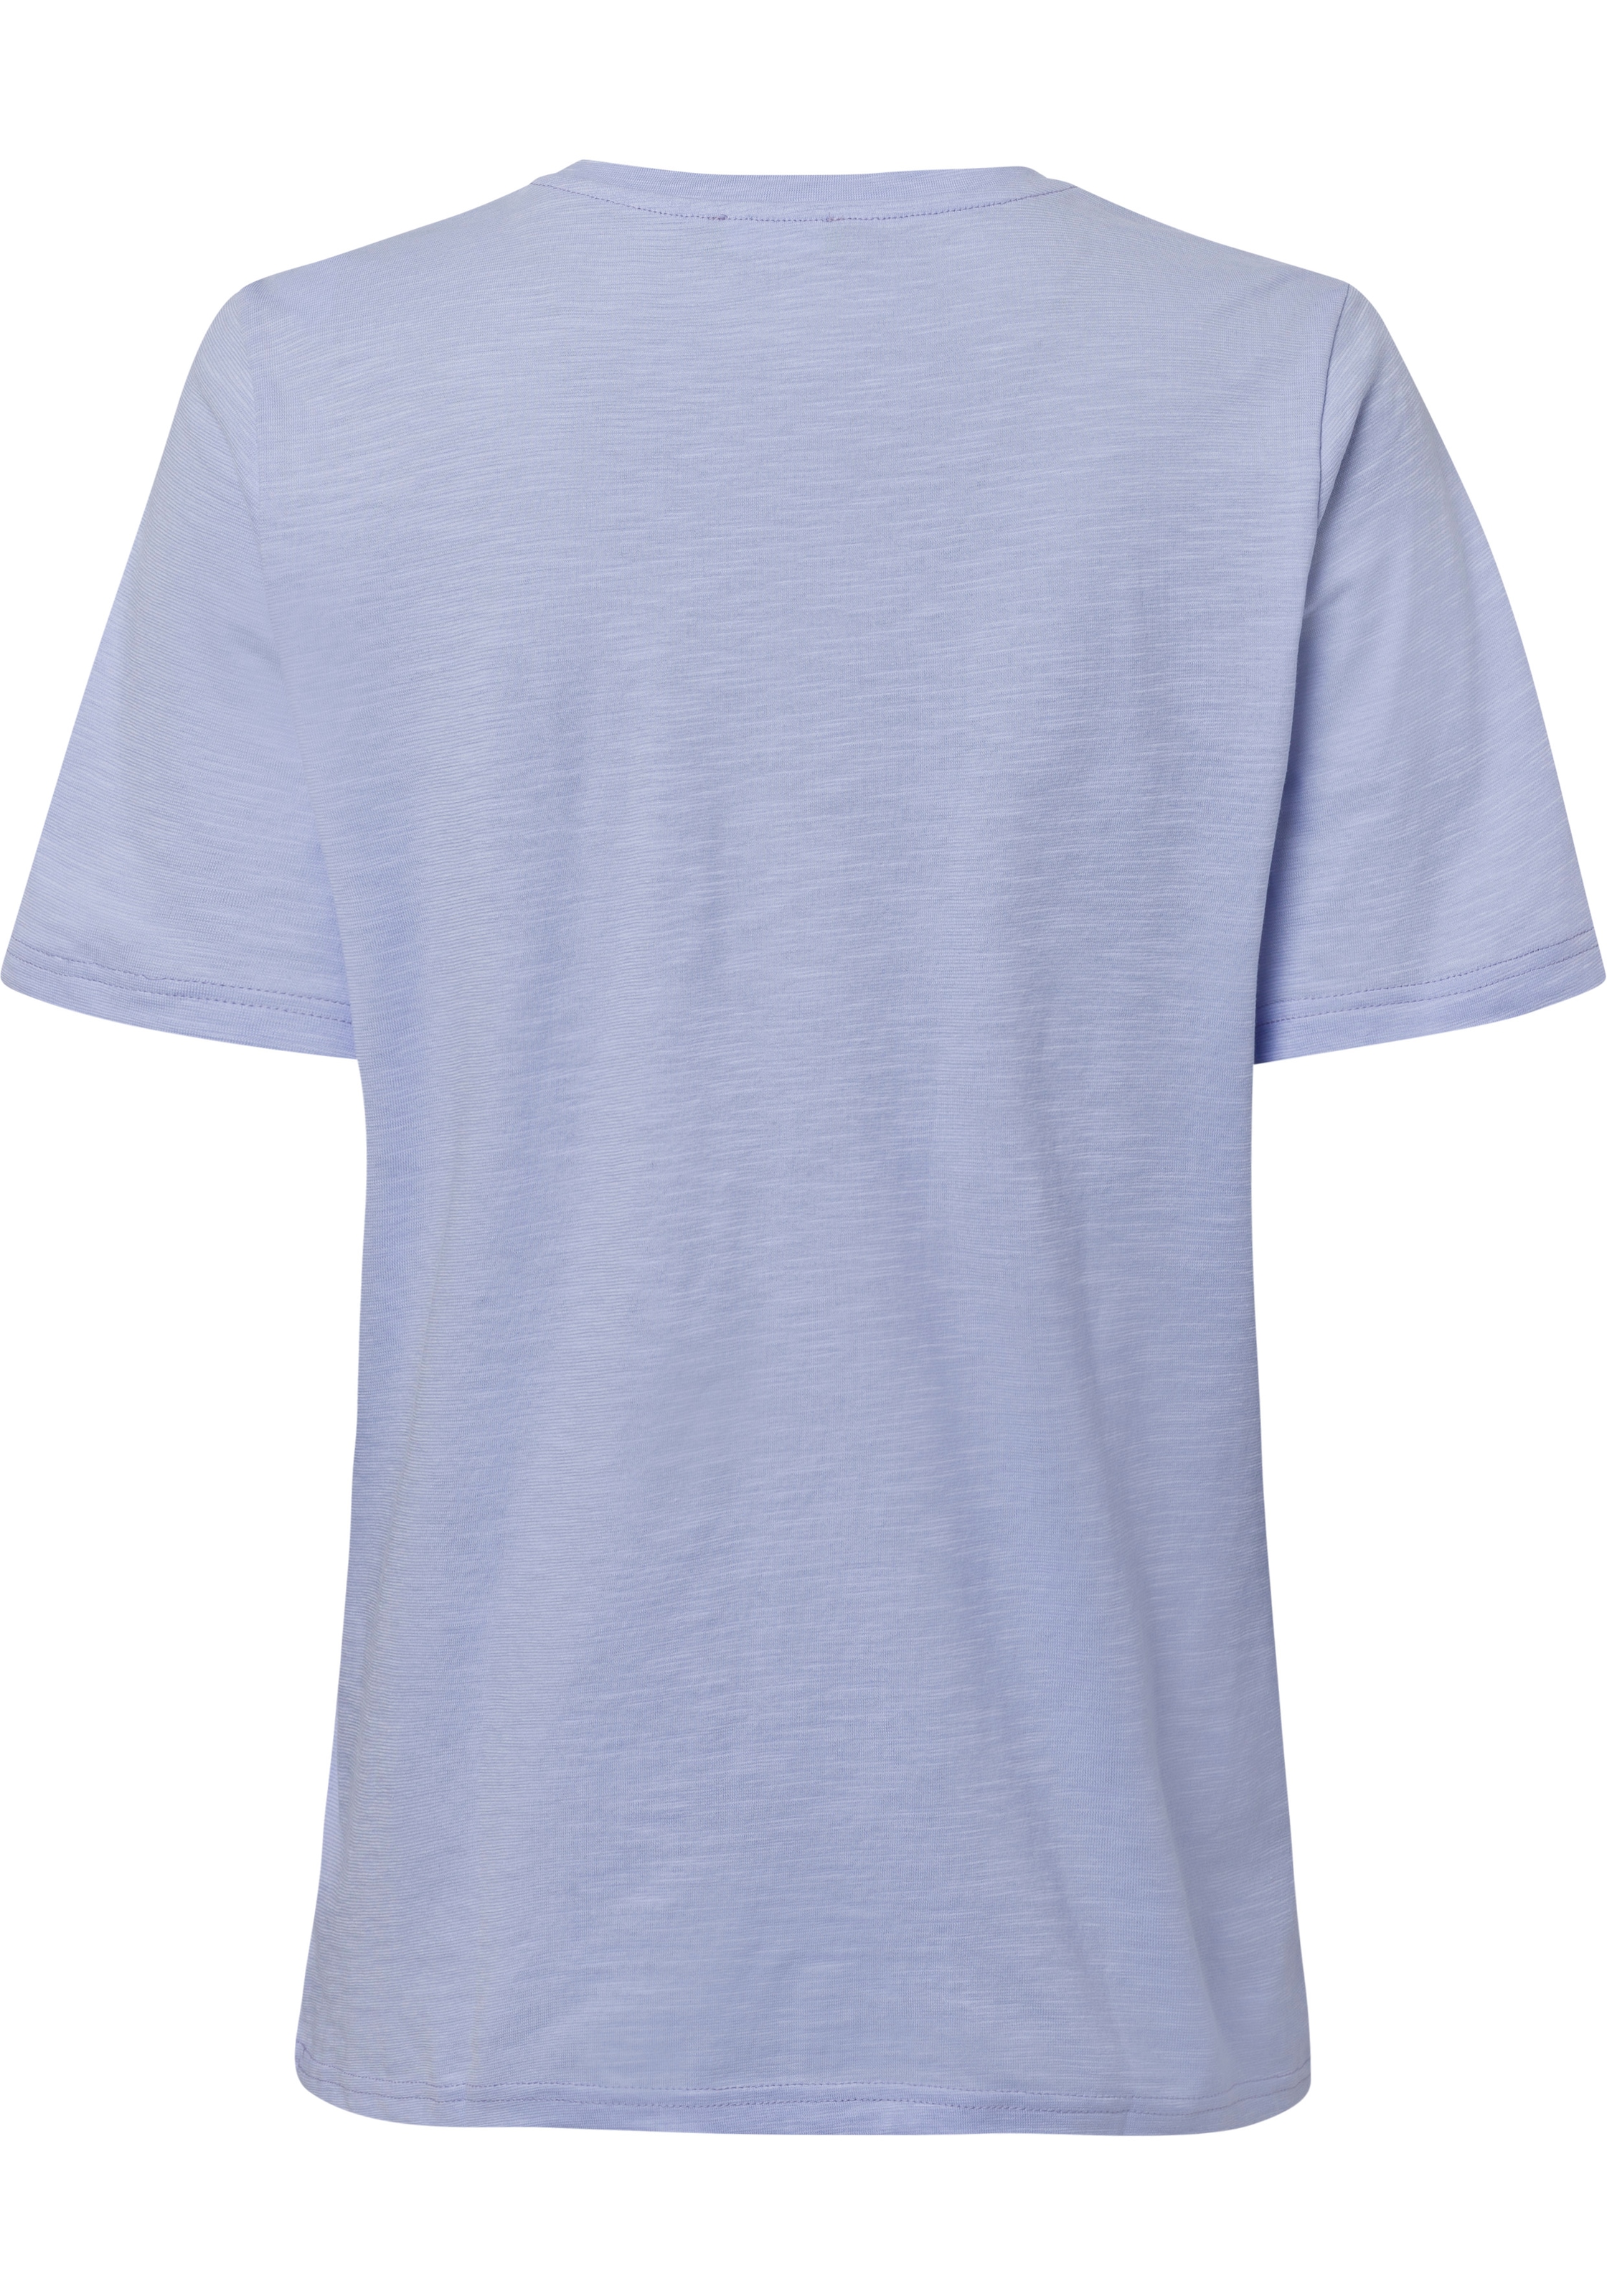 ♕ cleaner United bei Benetton Basic-Optik in T-Shirt, Colors of